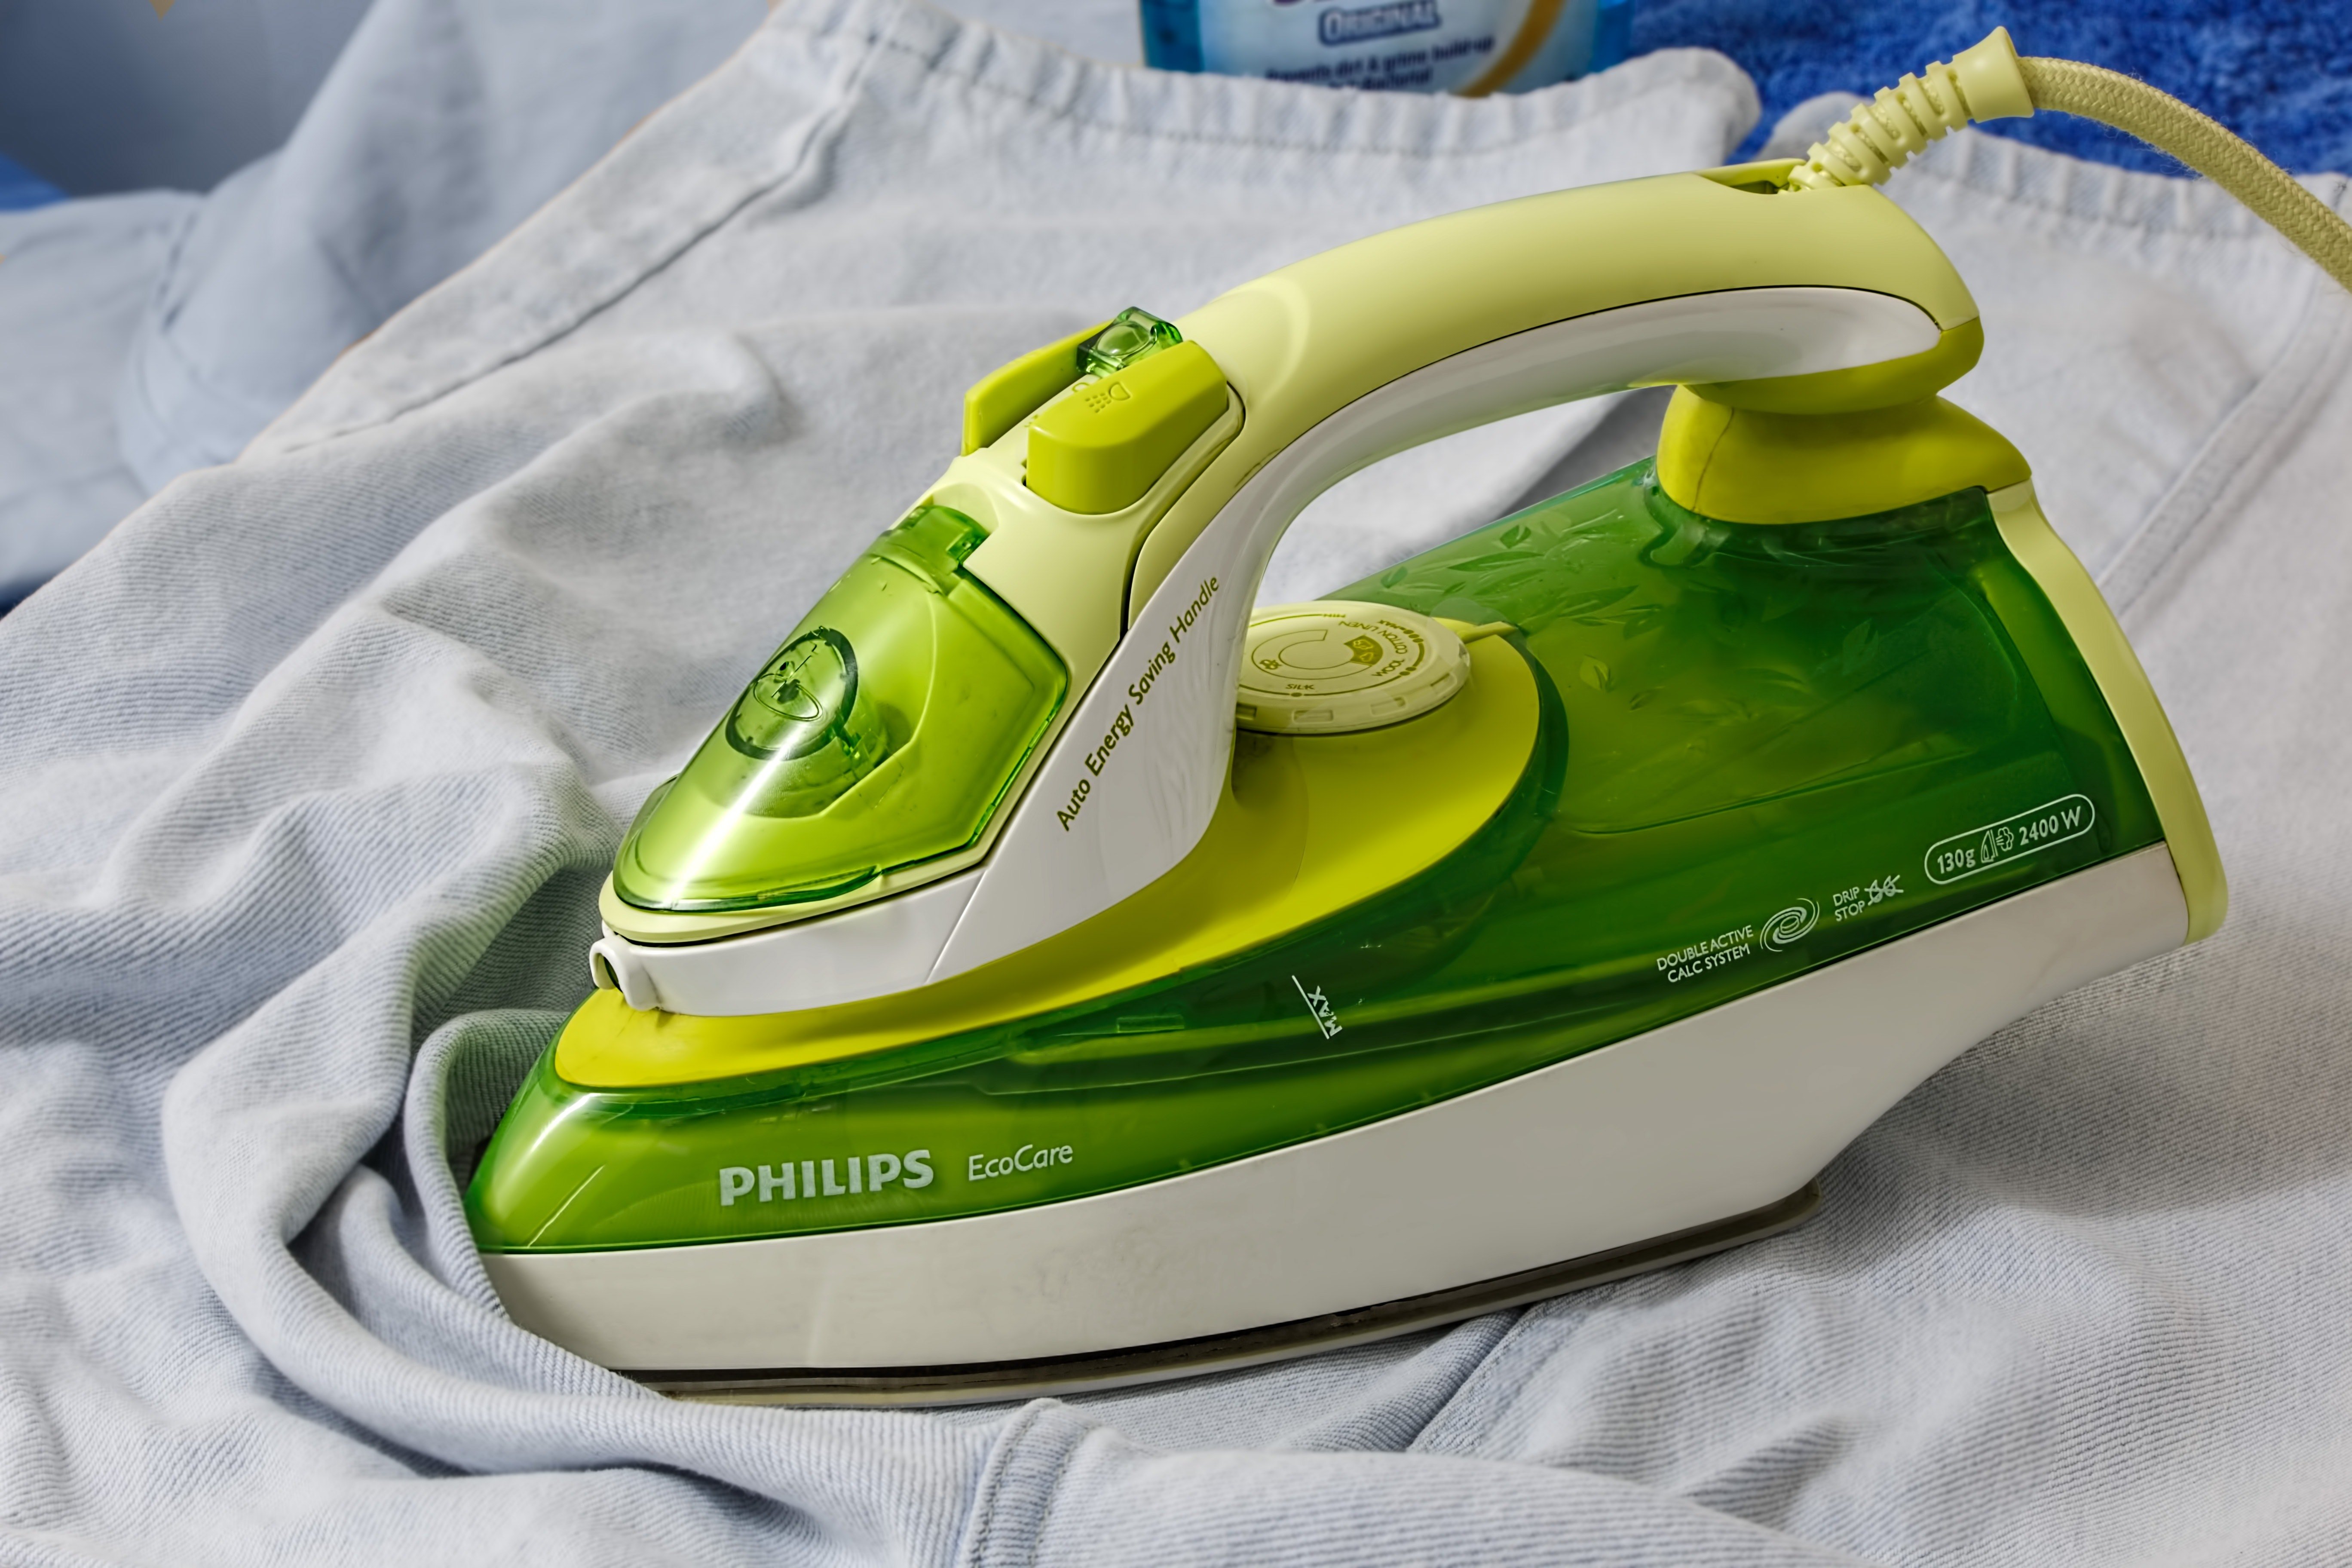 The passengers were totally surprised when he asked her to iron his shirt! | Photo: Pexels/Pixabay